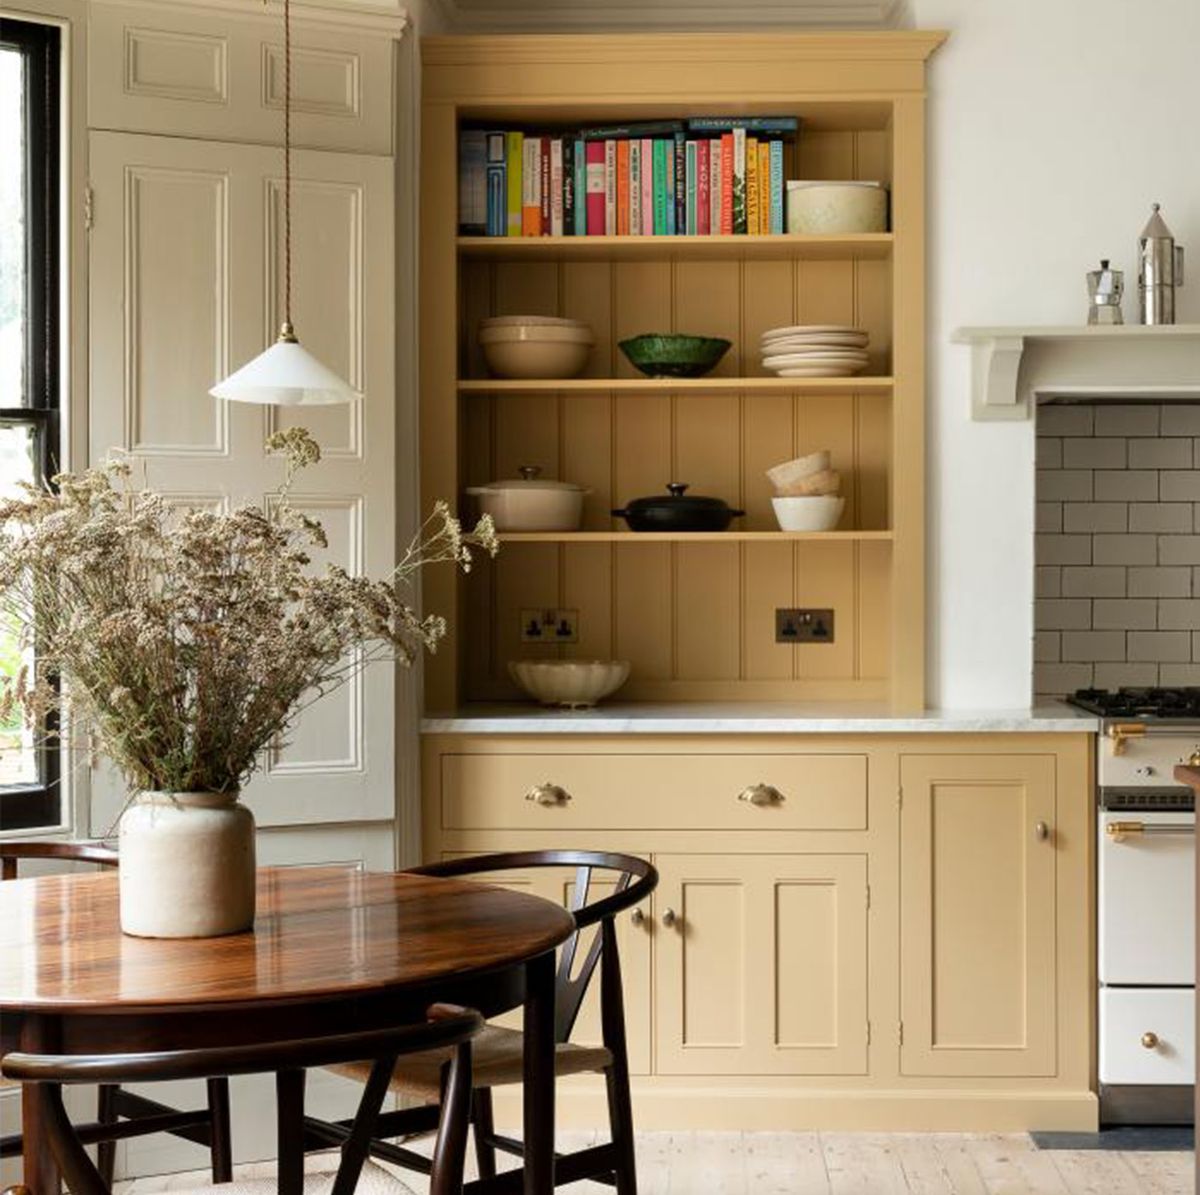 How To Paint Your Kitchen Cabinets